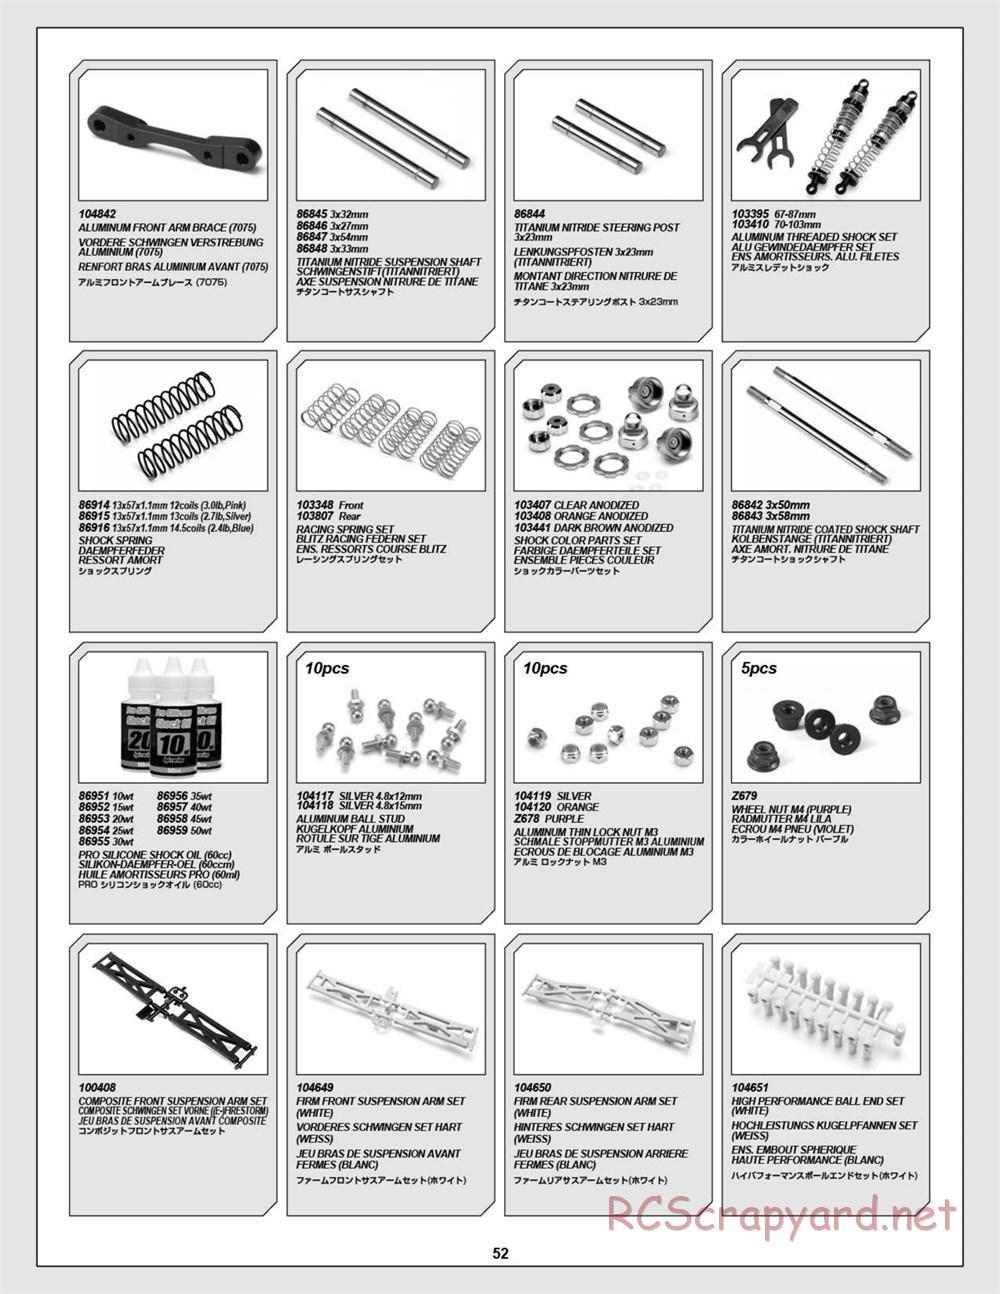 HPI - E-Firestorm 10T Flux - Exploded View - Page 52